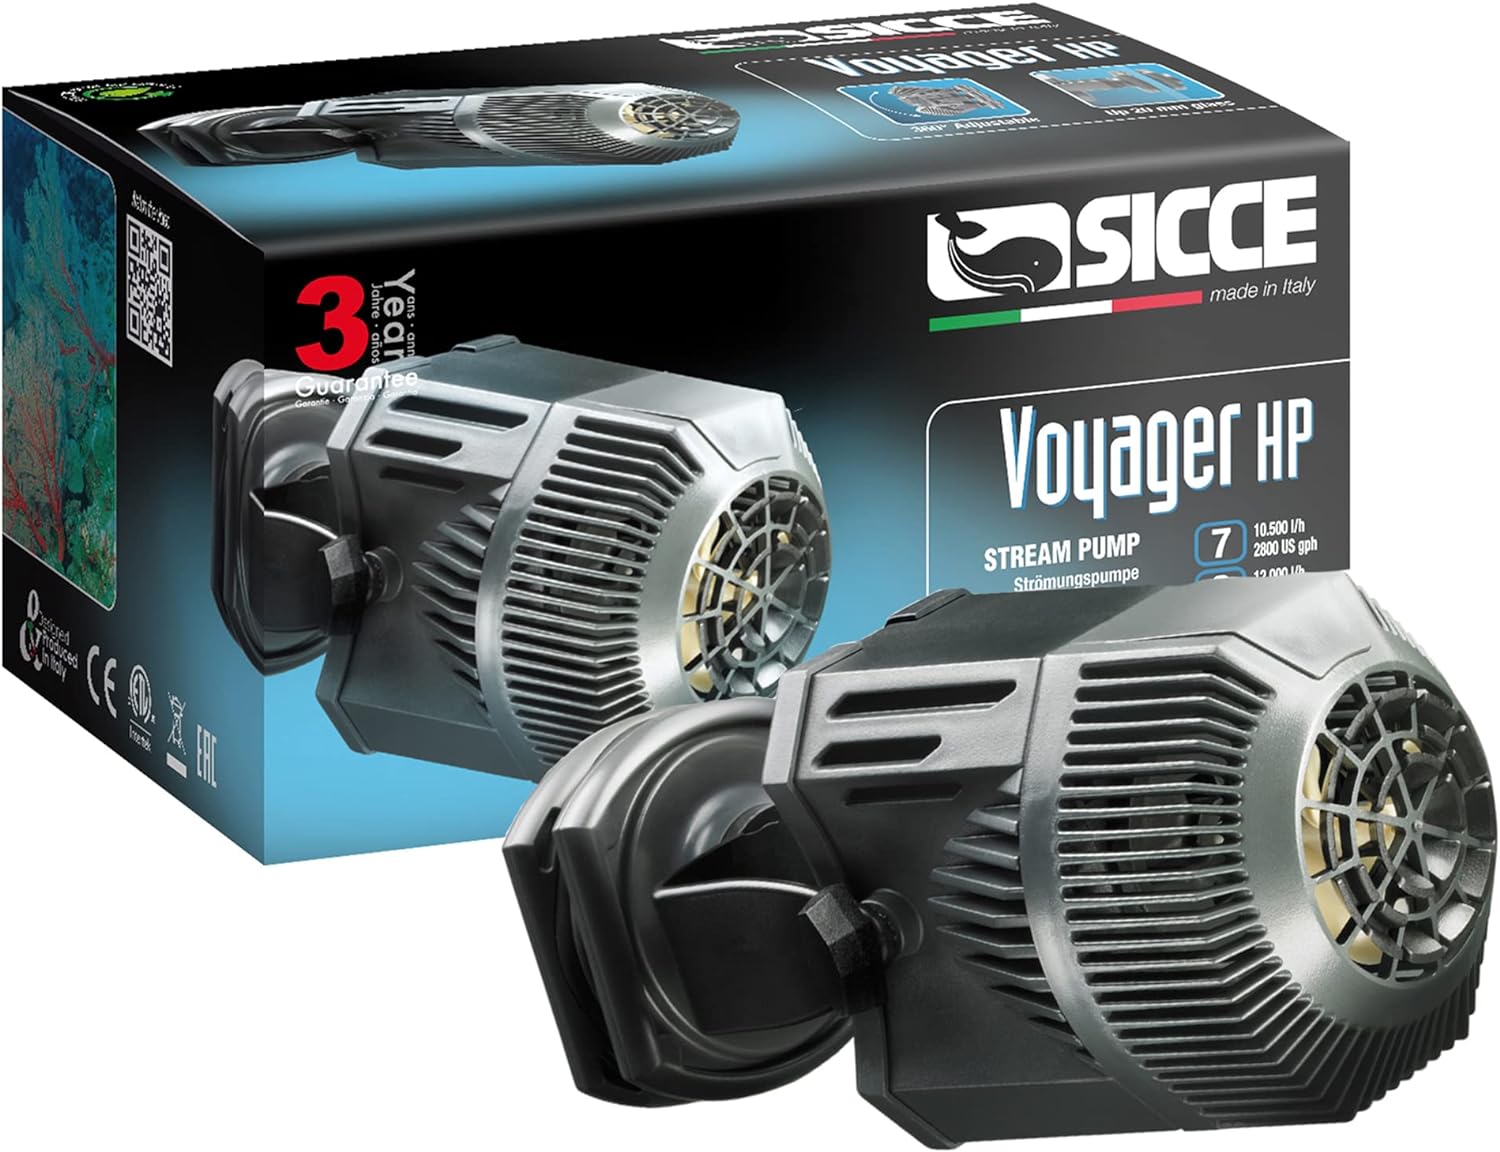 Sicce Voyager HP 7 - 10500 L/H